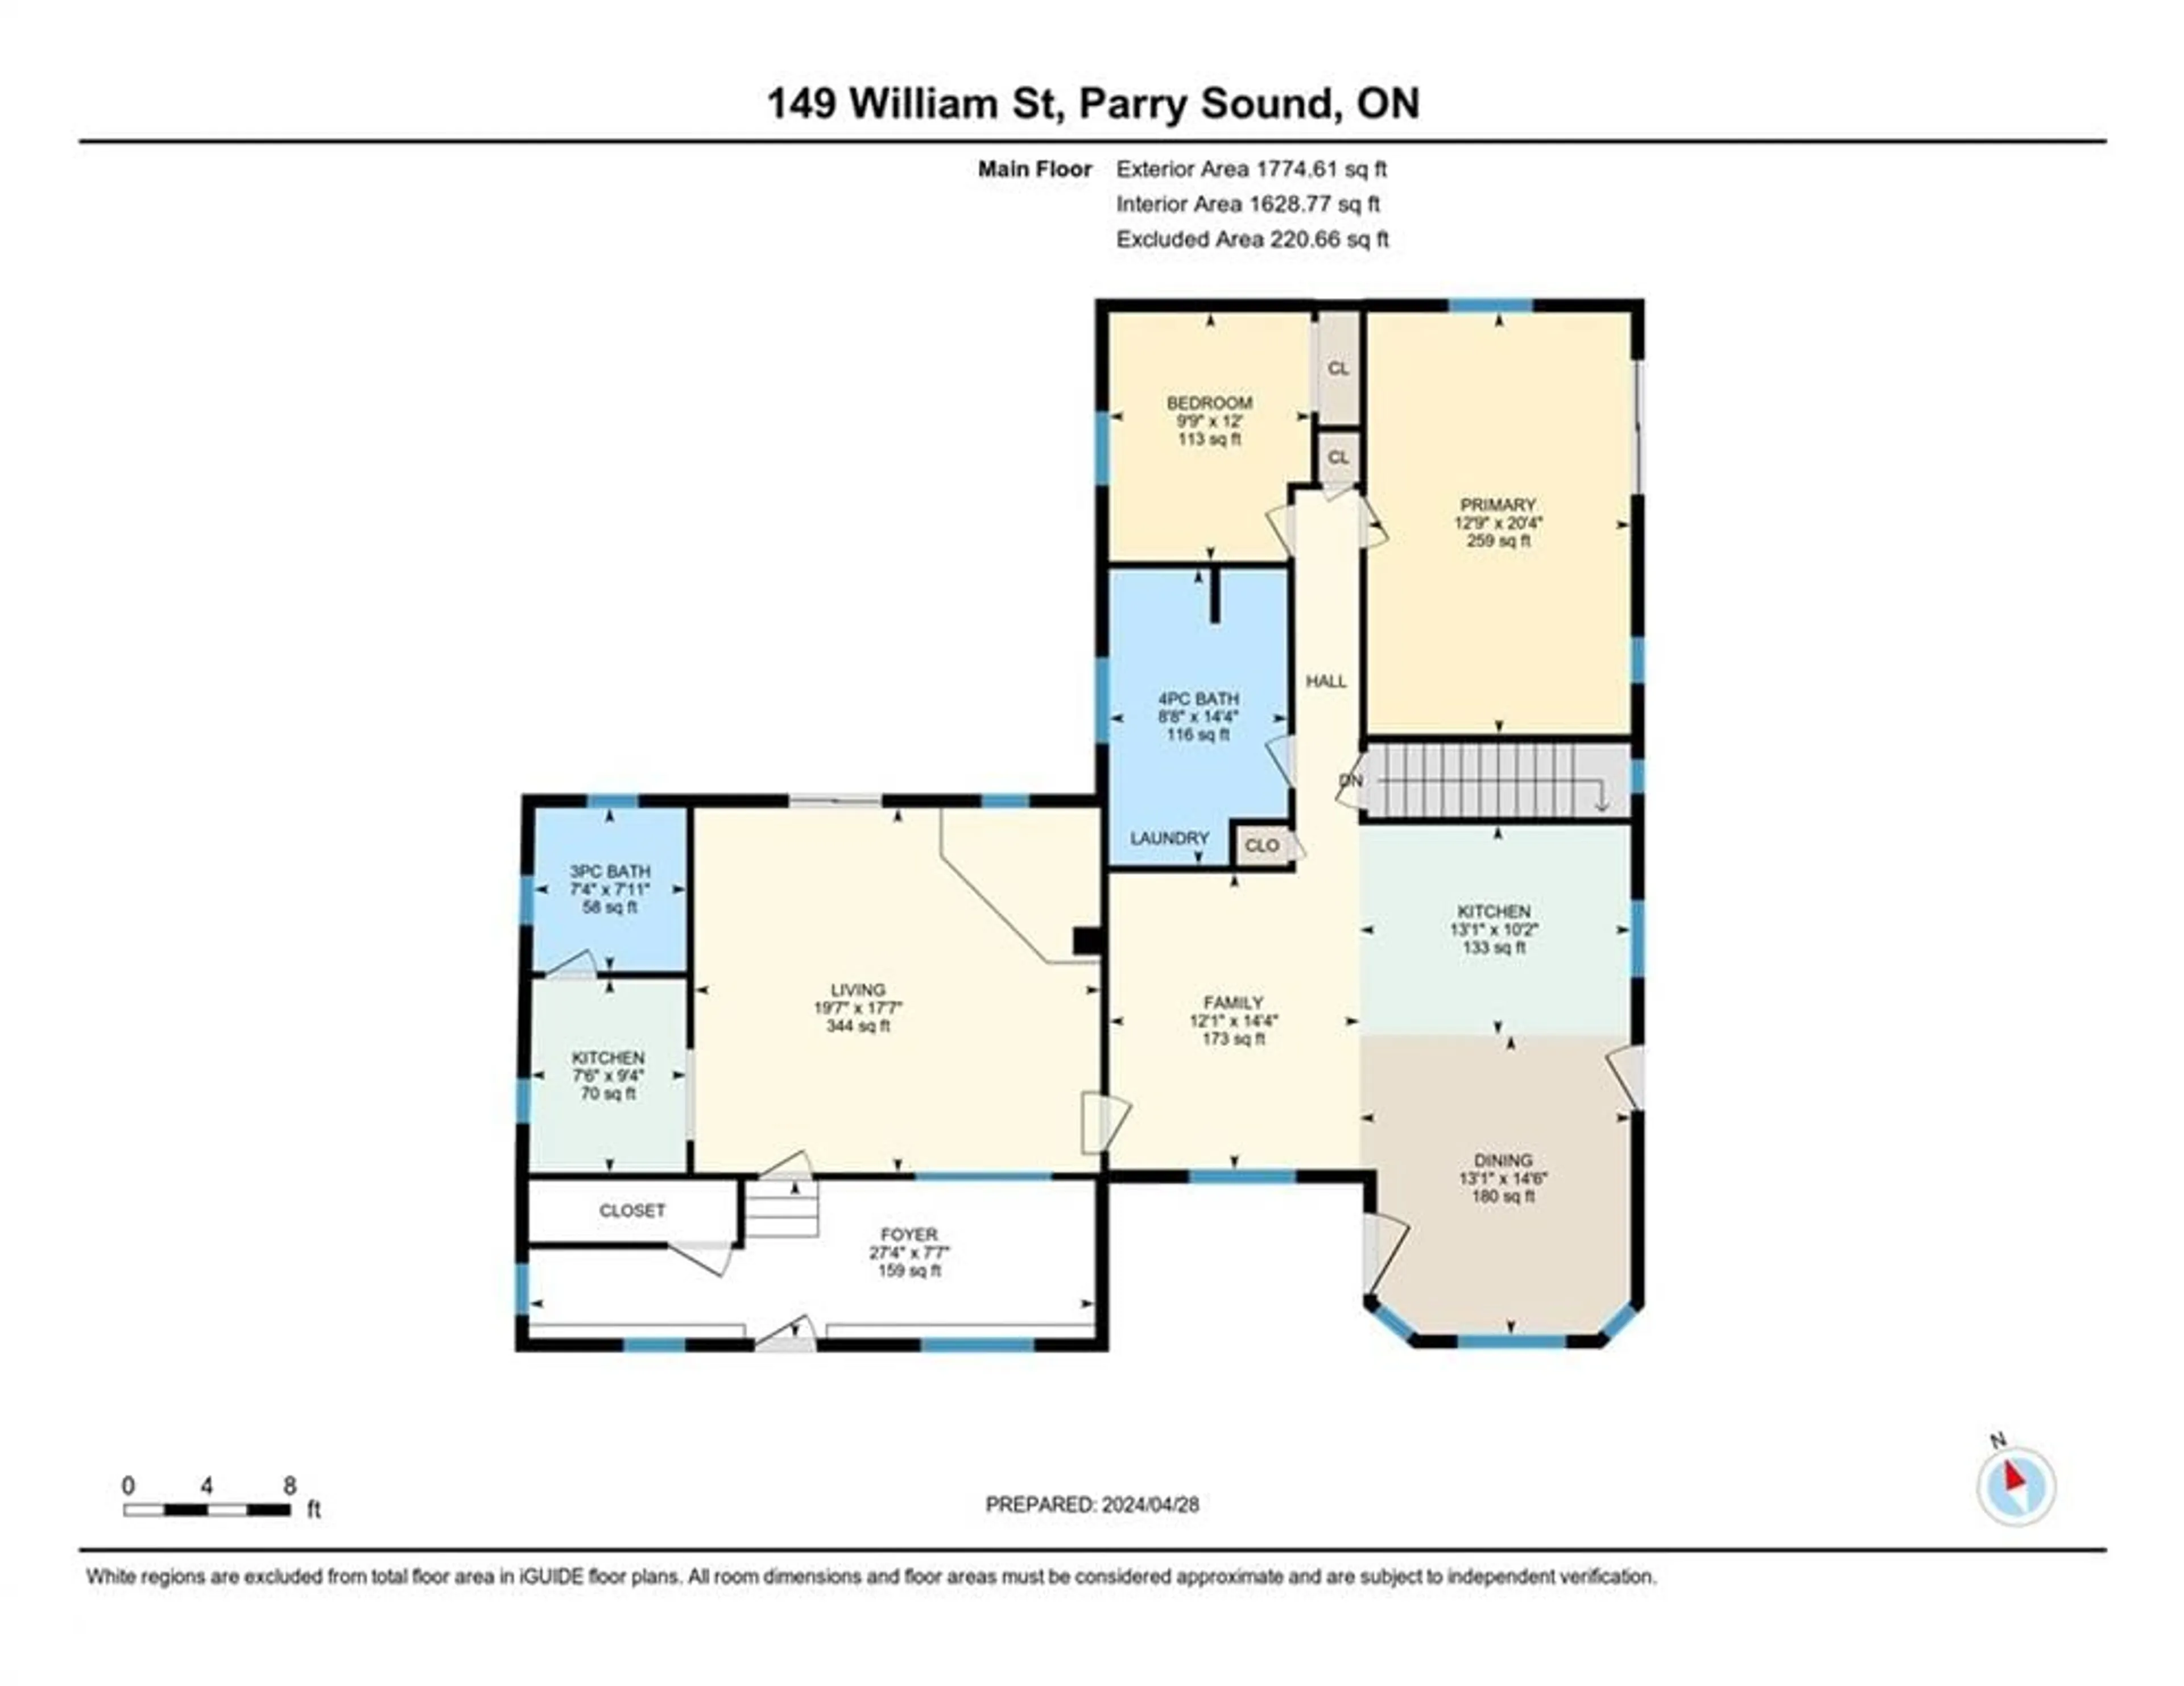 Floor plan for 149 William St, Parry Sound Ontario P2A 1W3